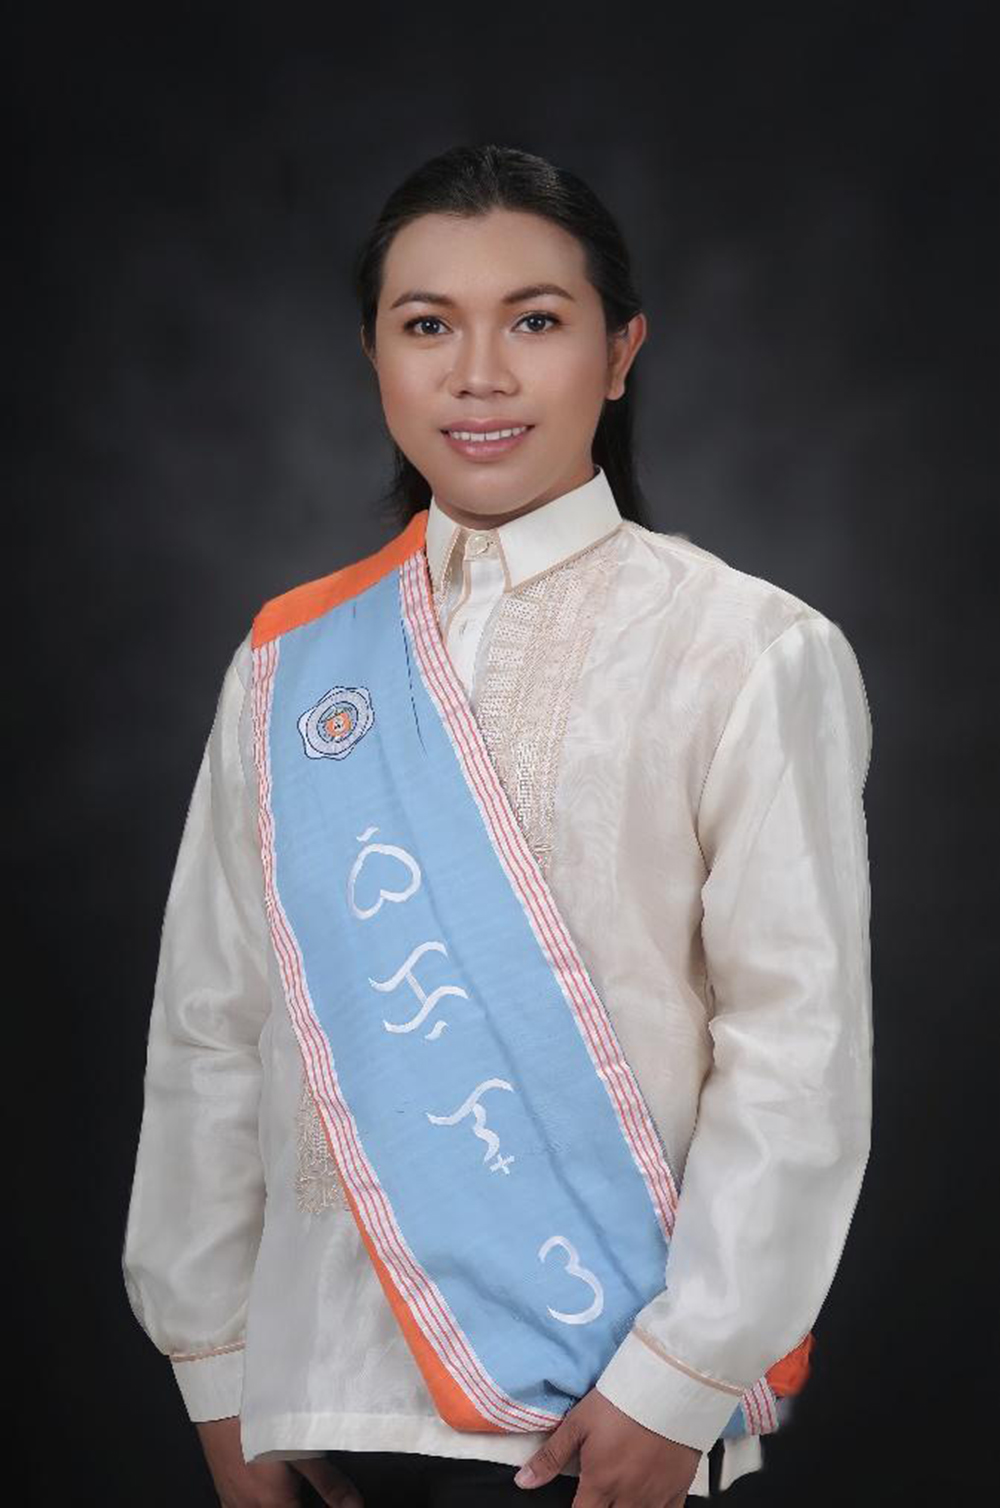 APRI scholars graduate with flying colors from Bicol University